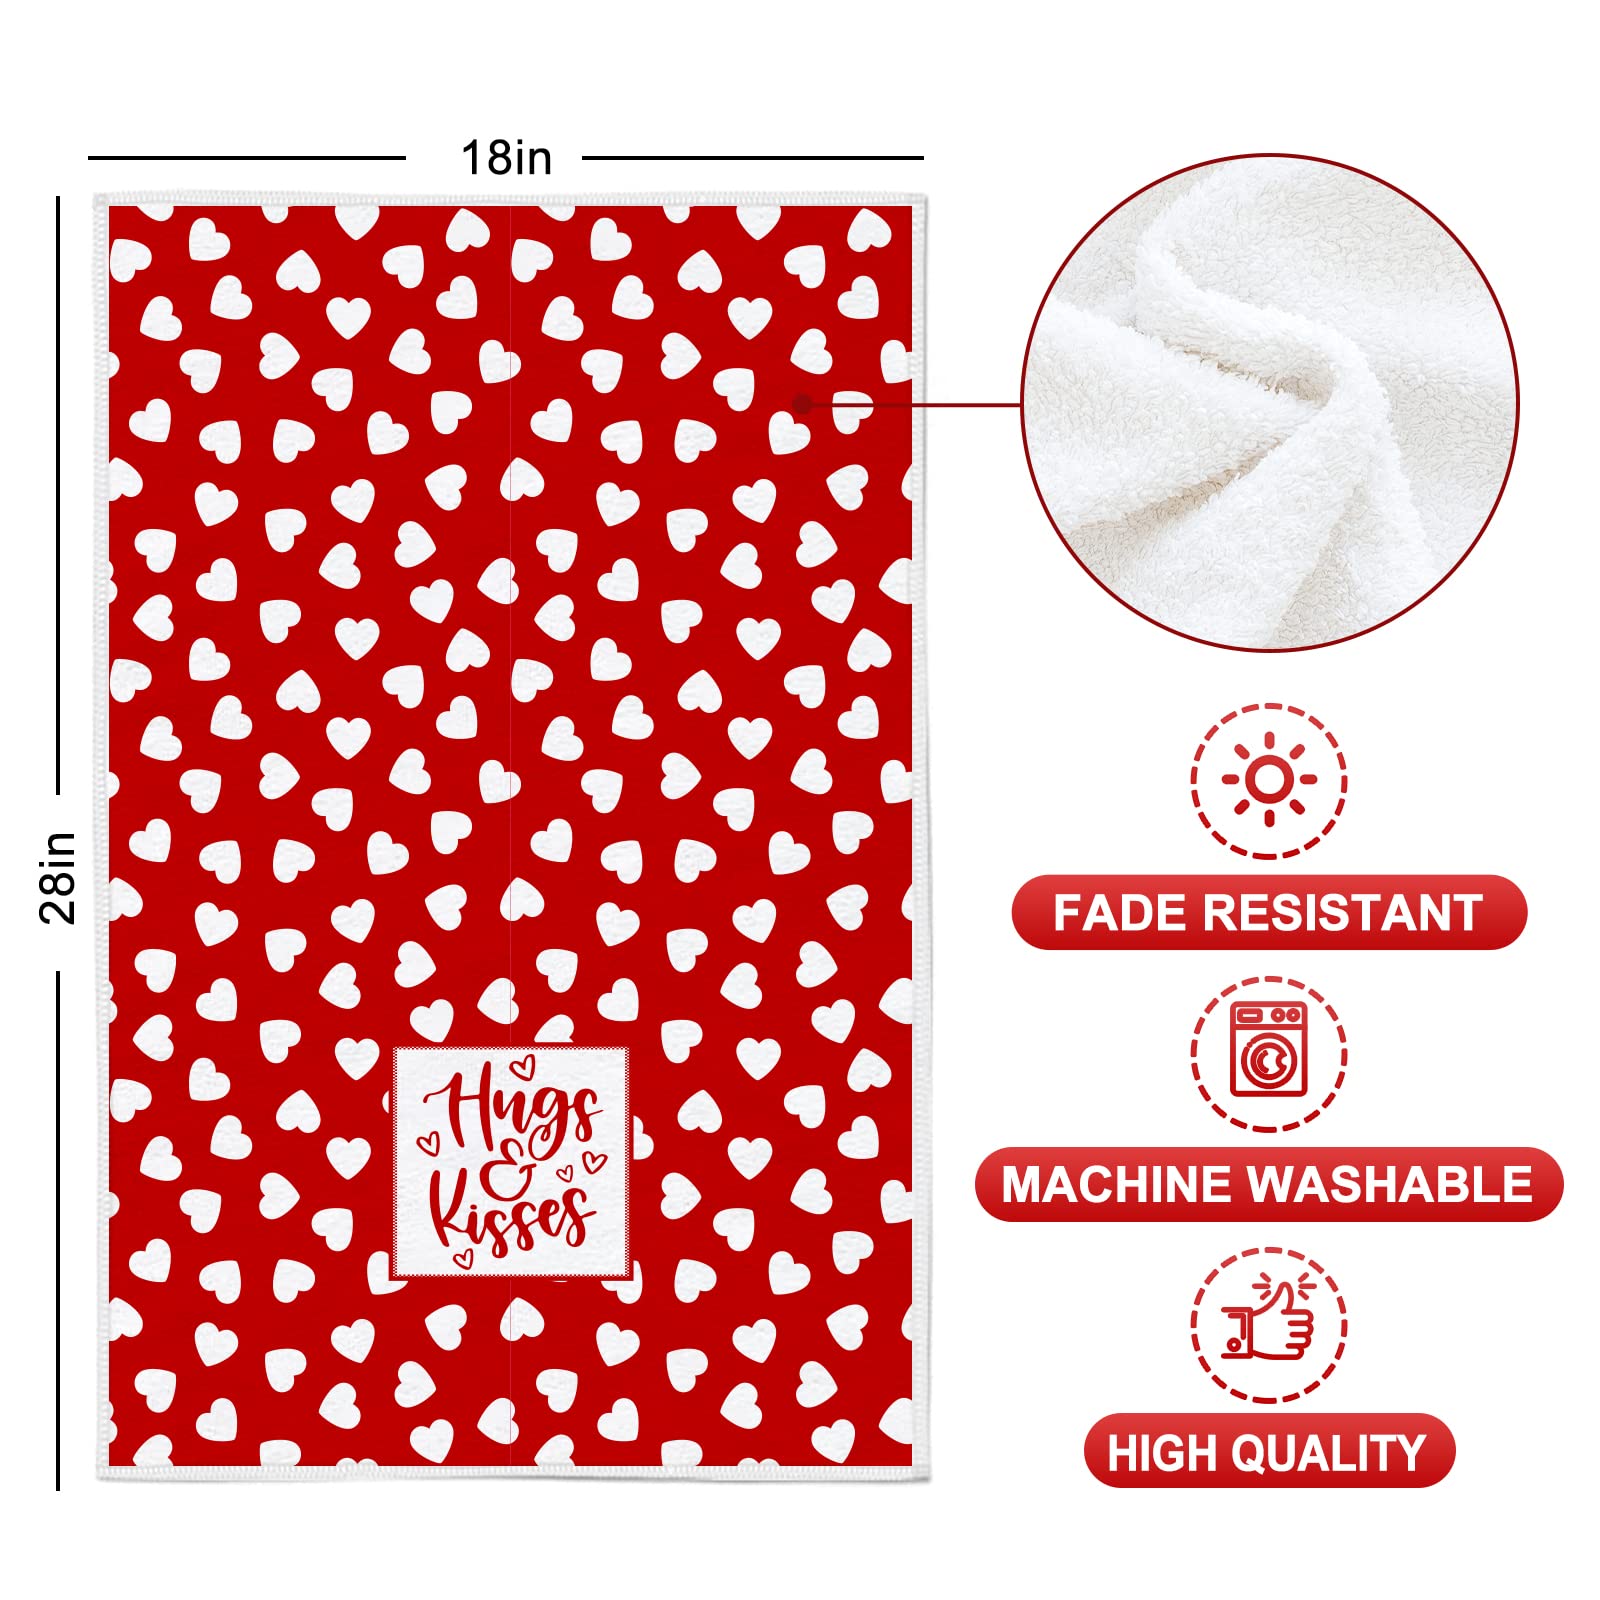 Whaline Valentine's Day Kitchen Towel Red White Dish Towel Heart Love Plaid Dishcloth Large Tea Towel Decorative Holiday Cloth Towel for Valentine's Day Home Kitchen Coking Baking, 4 Designs, 28 x 18